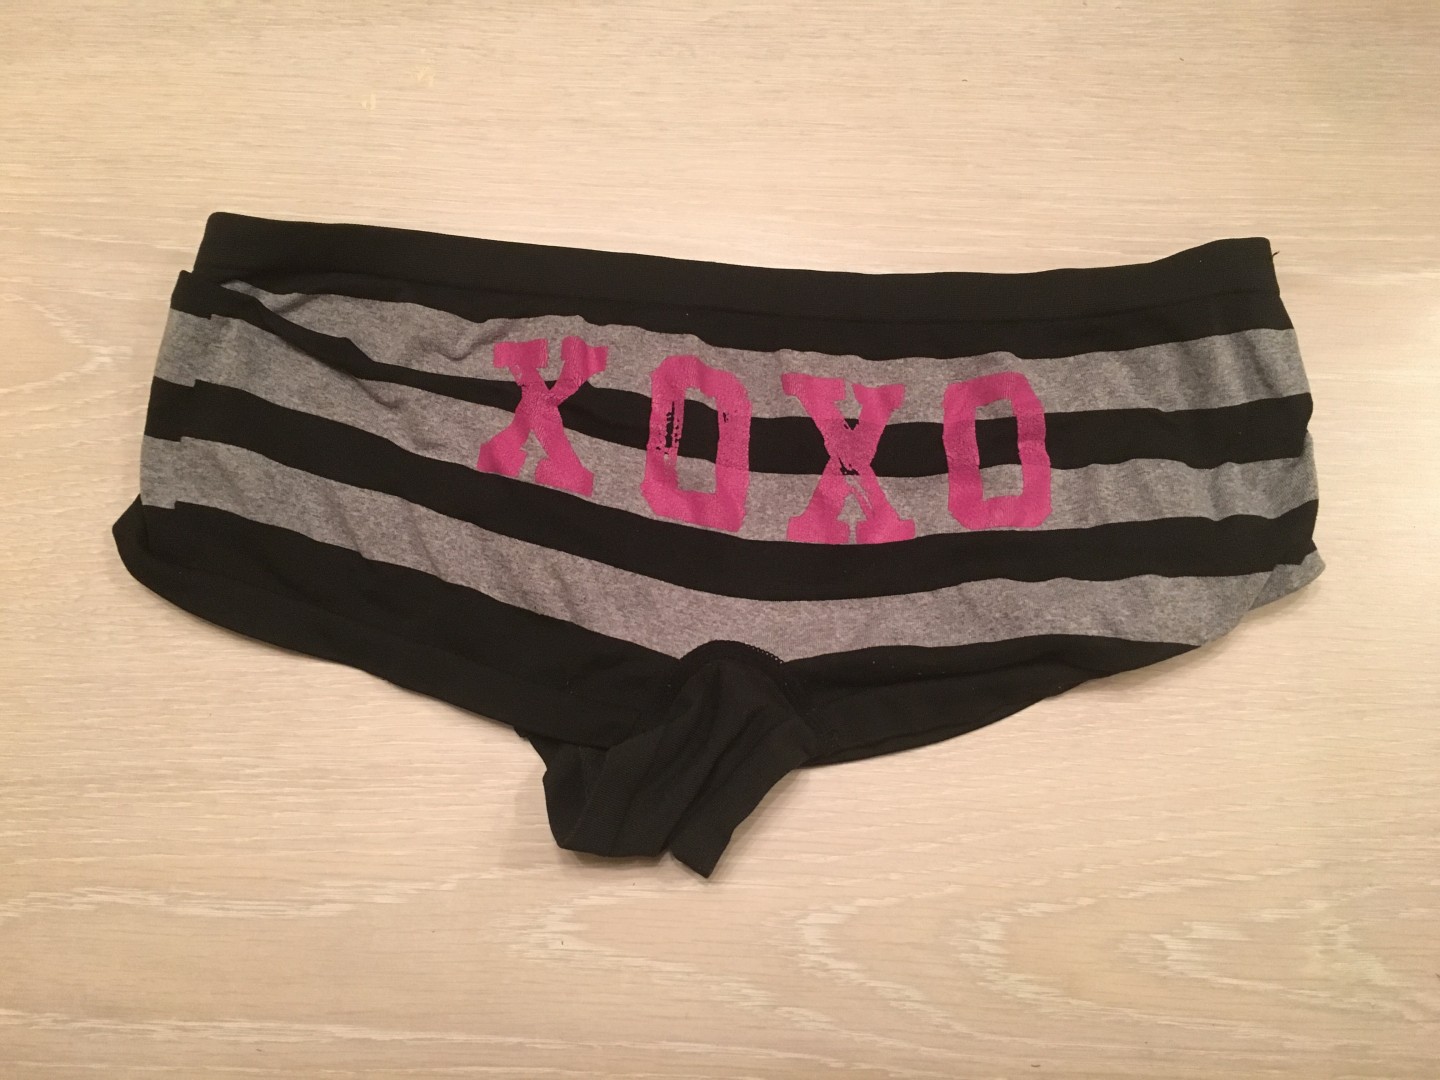 My first panties. I'm so turned …